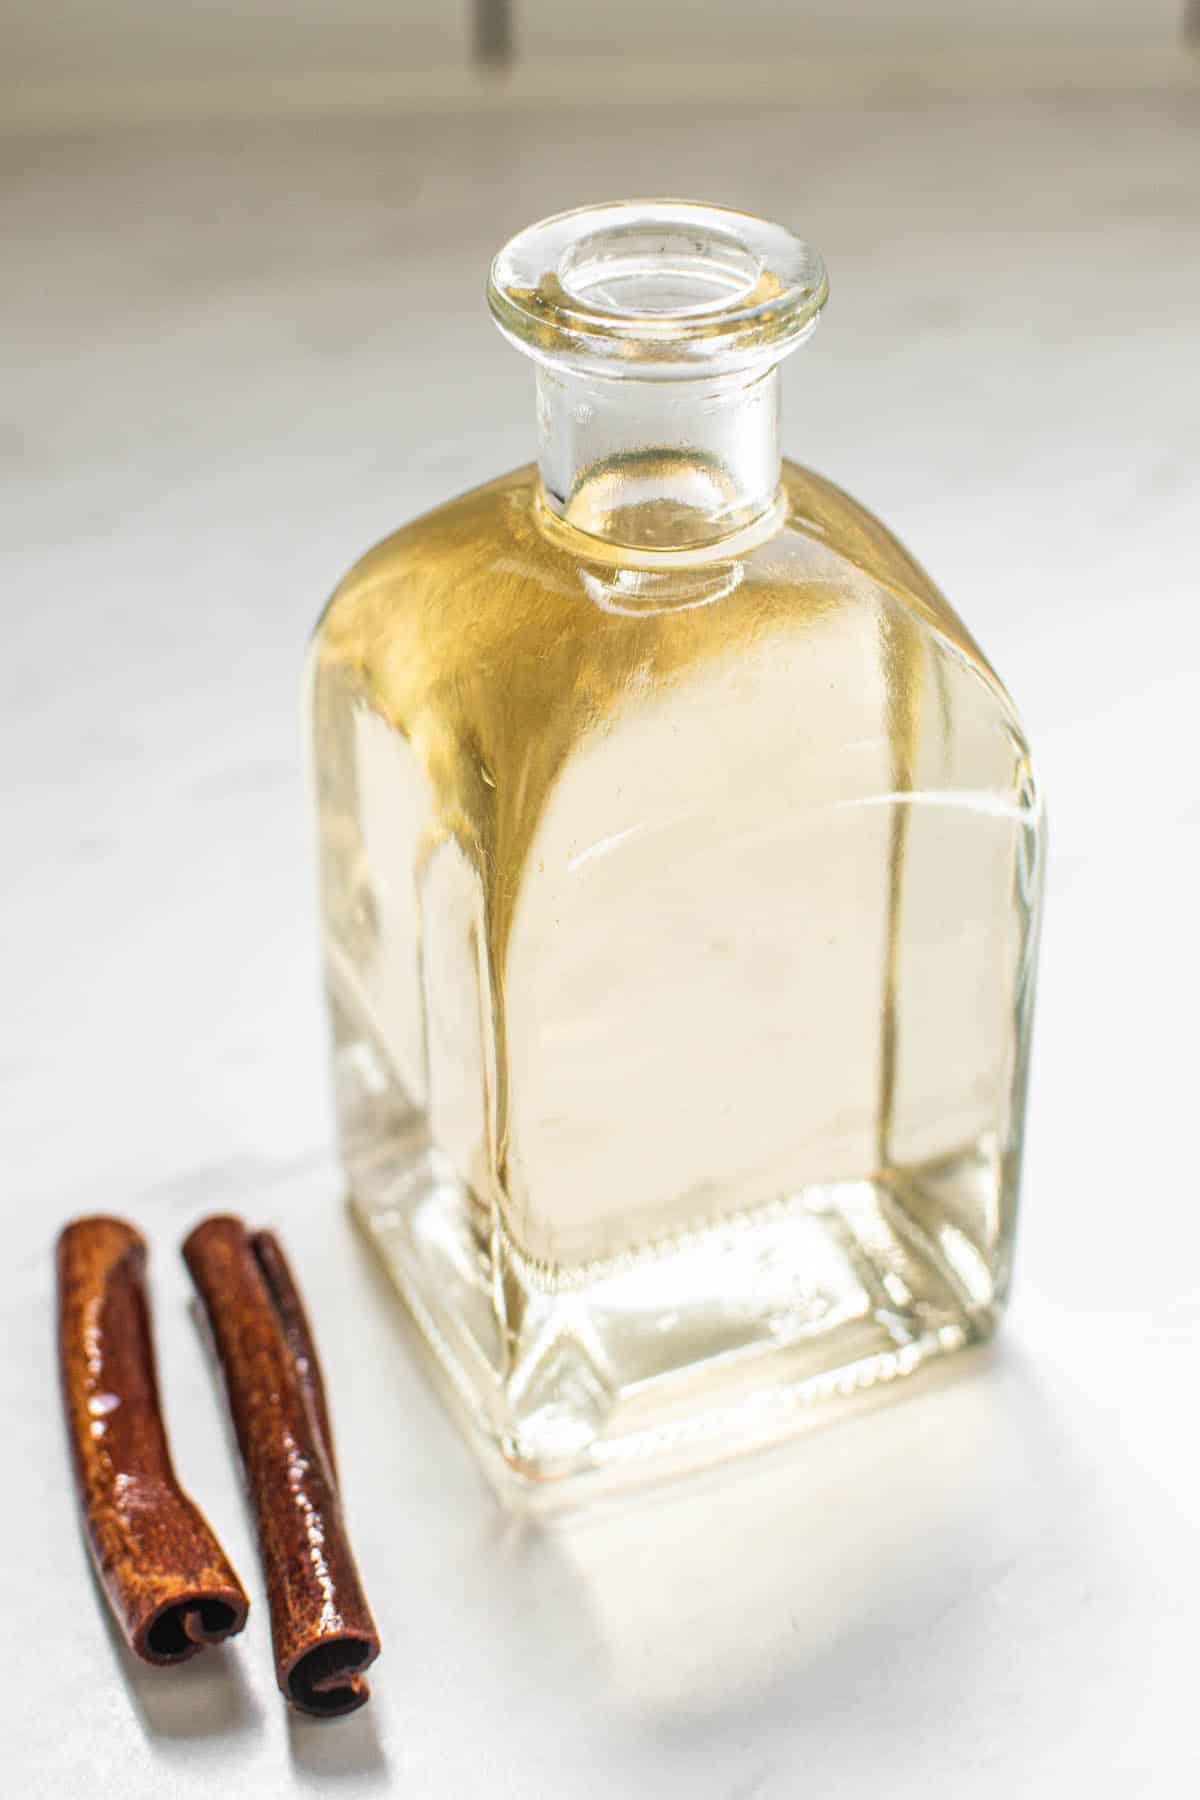 a bottle of cinnamon syrup.